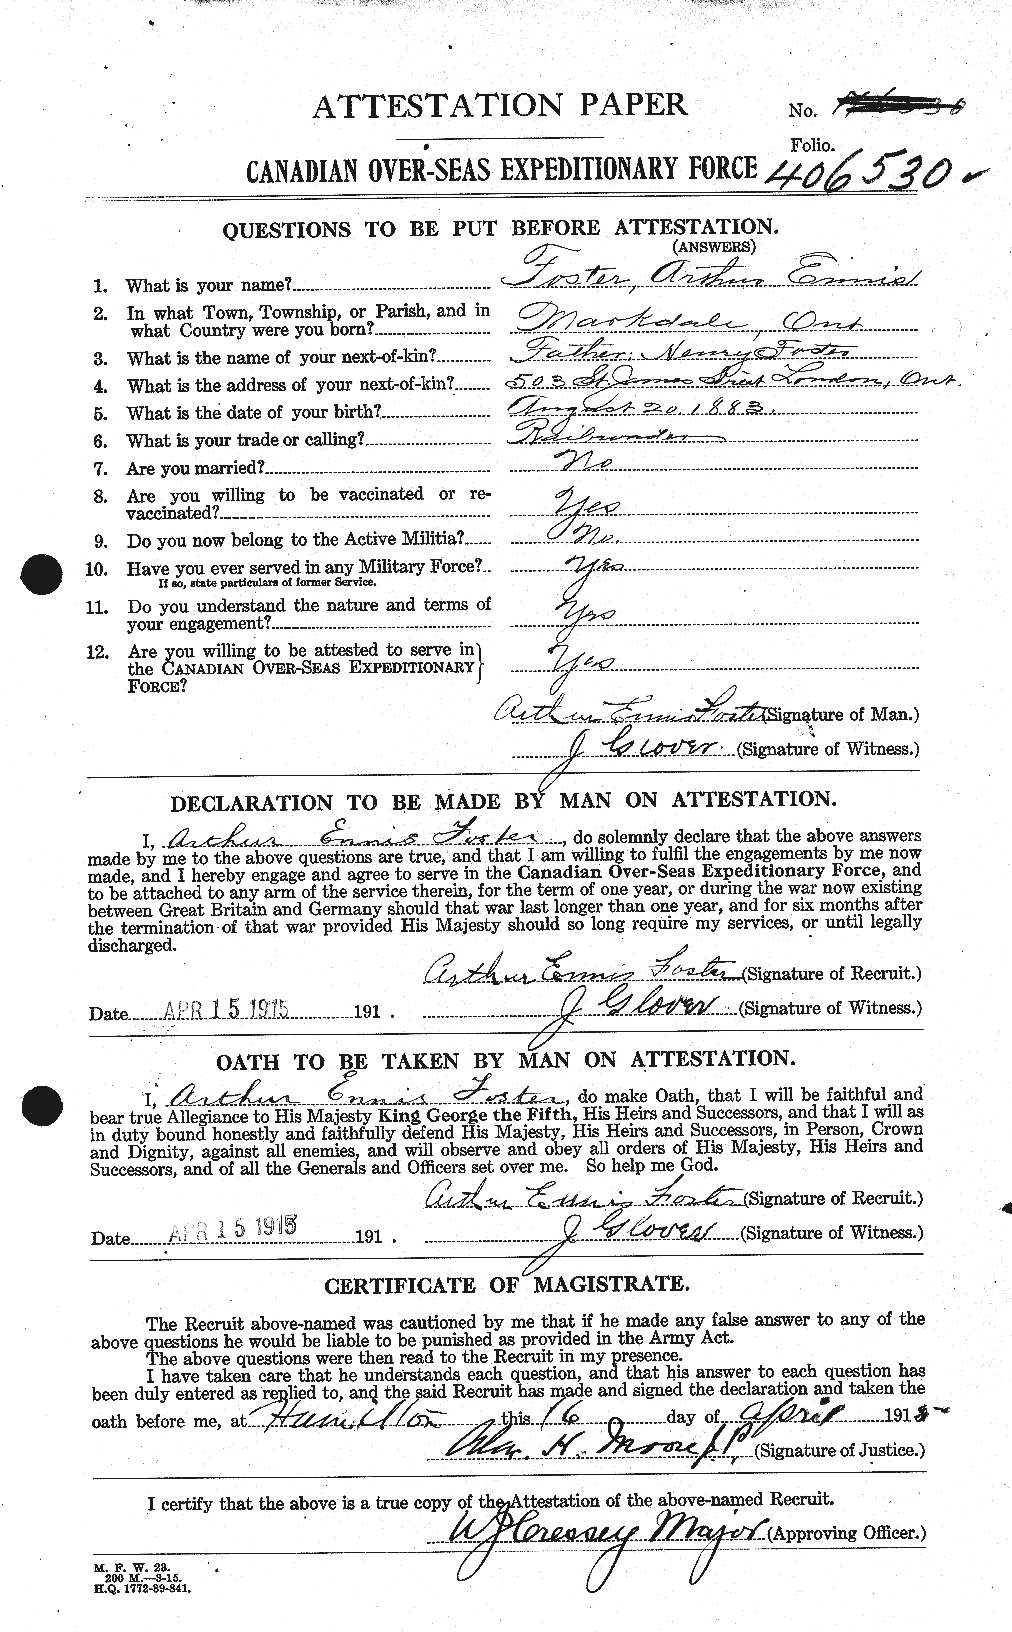 Personnel Records of the First World War - CEF 330470a